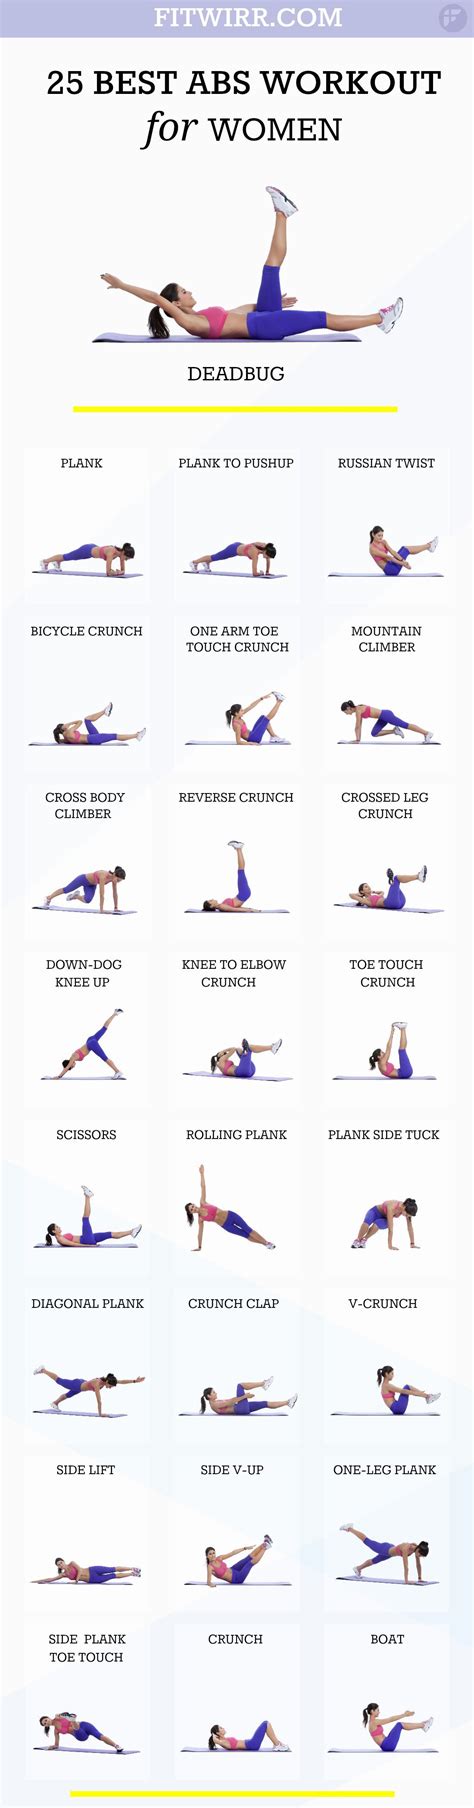 25 Best Ab Workouts For Women Top Ab Exercises For 2018 Exercises Workout Exercises And Workout